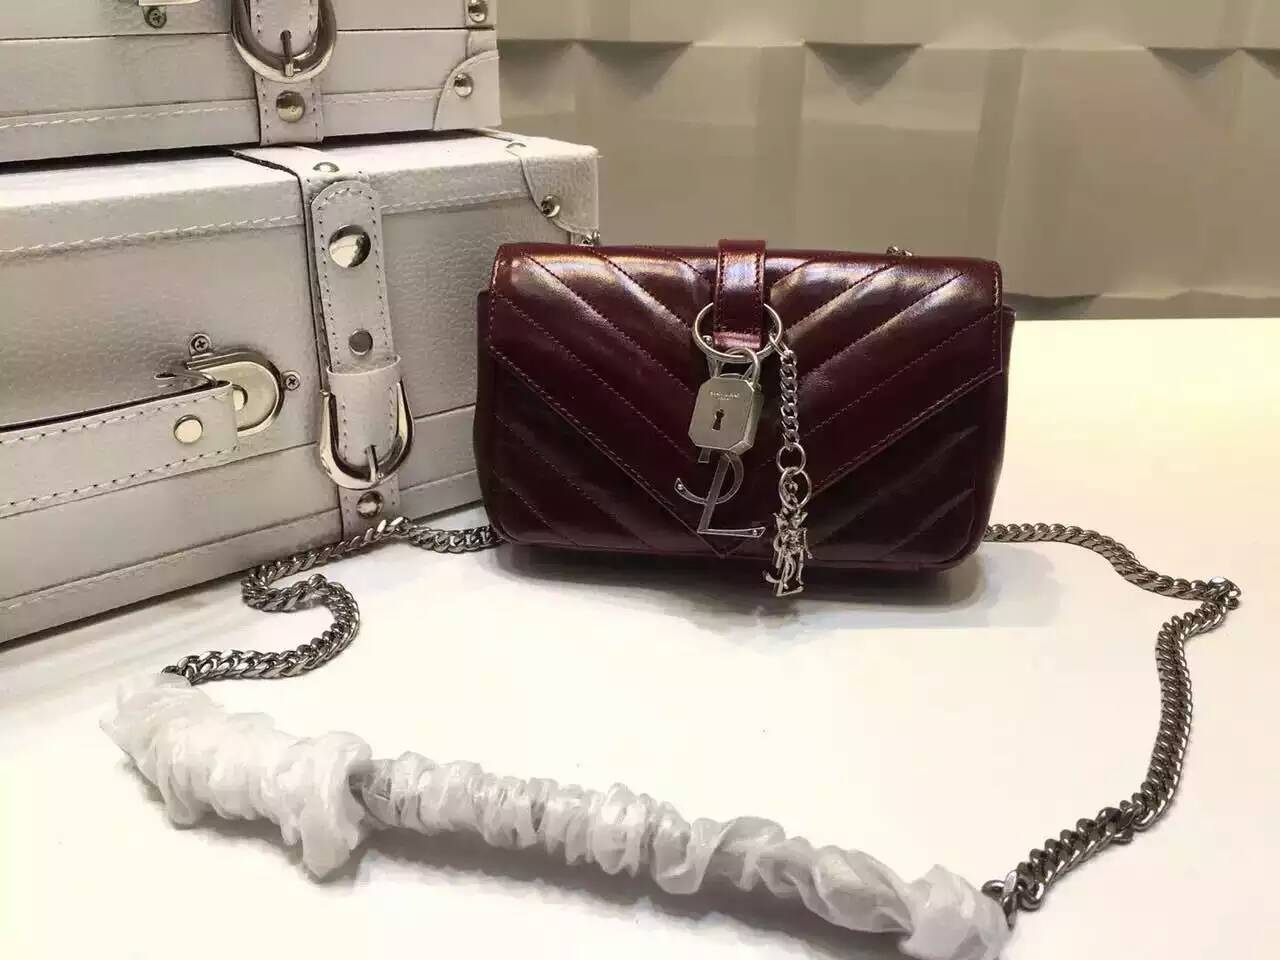 S/S 2016 Saint Laurent Bags Cheap Sale-Saint Laurent Classic Baby Monogram Chain Bag in Burgundy Shiny Matelasse Leather with Silver "YSL"